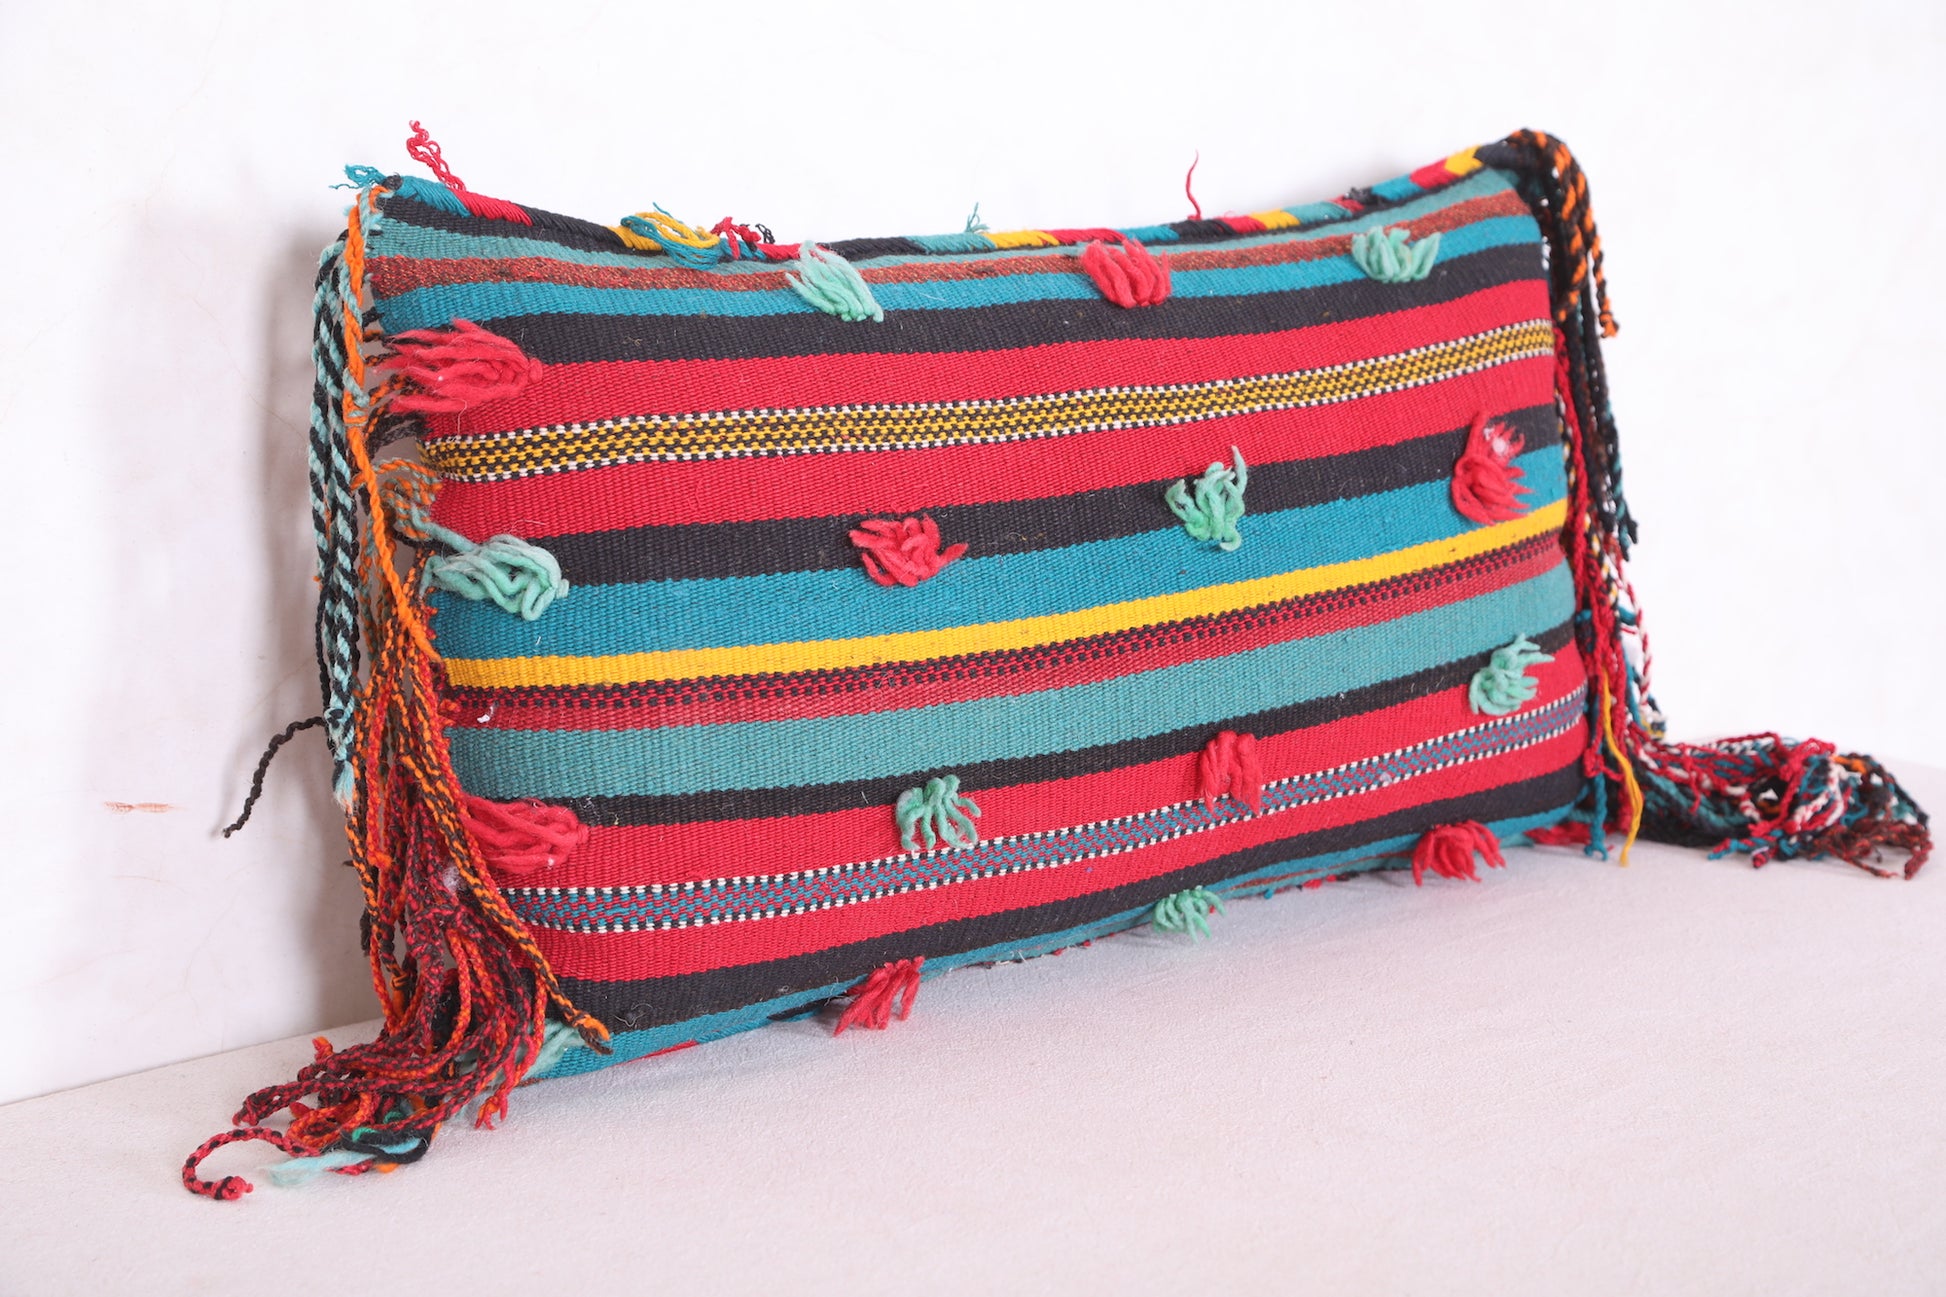 Colorful Moroccan Kilim Pillow 14.5 INCHES X 24.4 INCHES